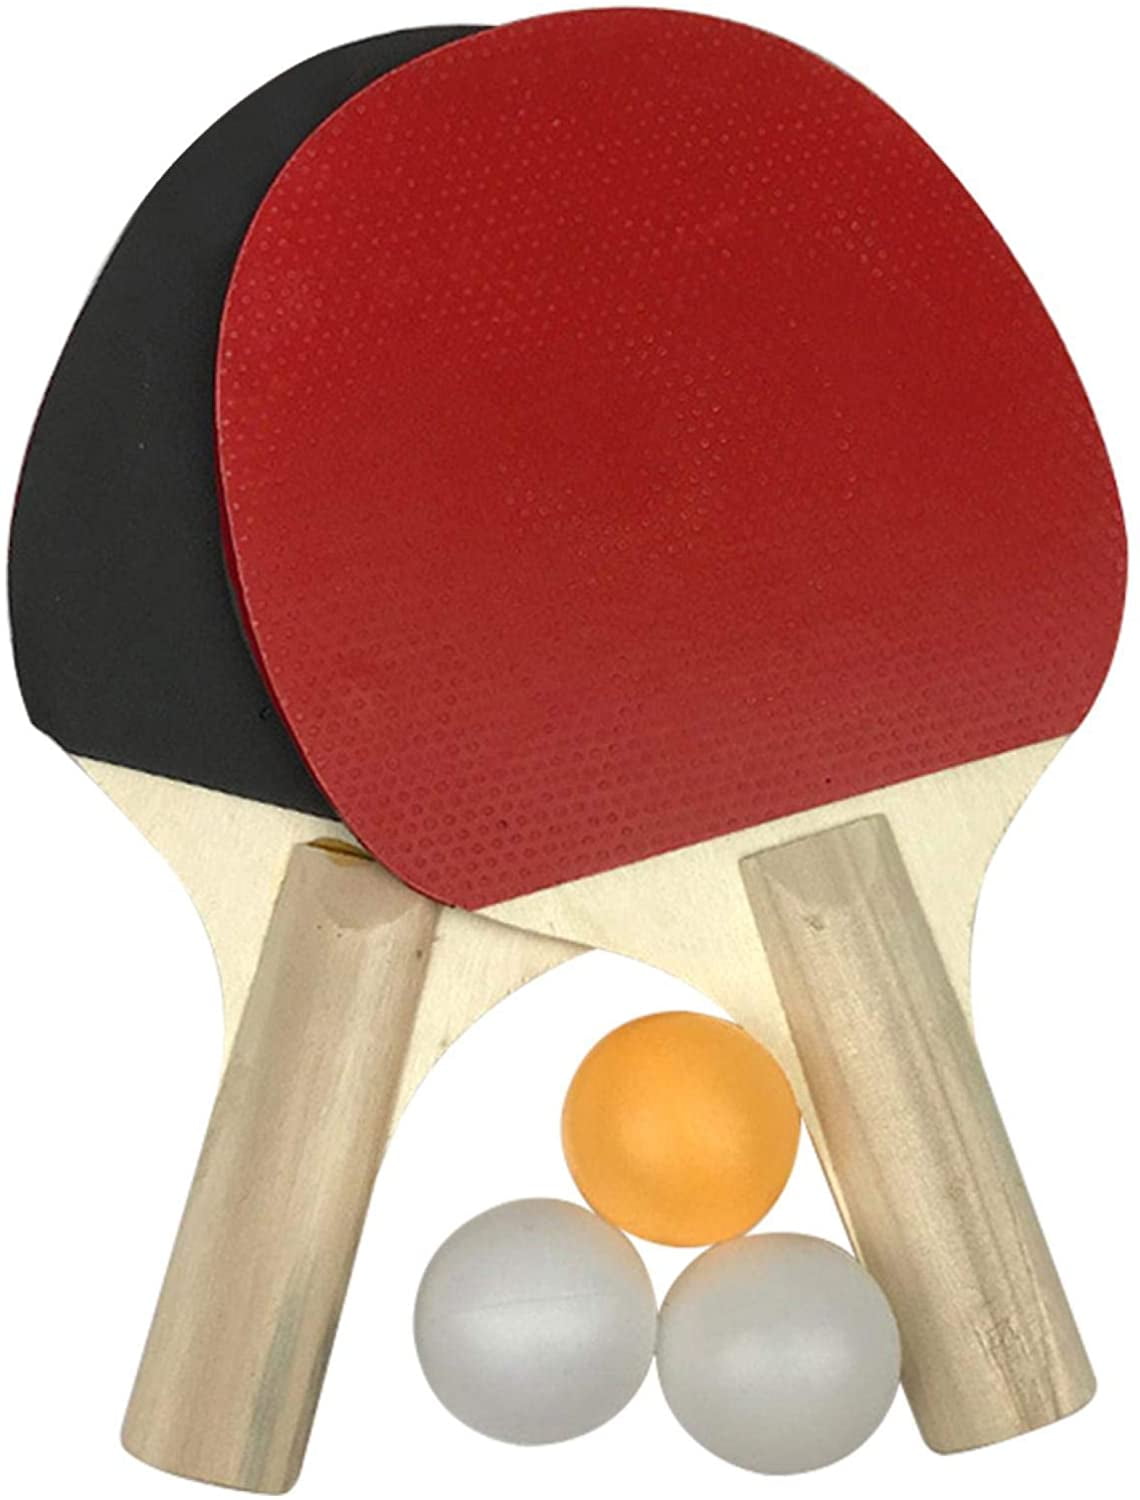 Perfect Set On The Go Ideal for Professional & Recreational Games 2 or 4 Players Soft Sponge Rubber Pack of 4 Premium Paddles/Rackets and 6 Table Tennis Balls Table Tennis Ping Pong Set 